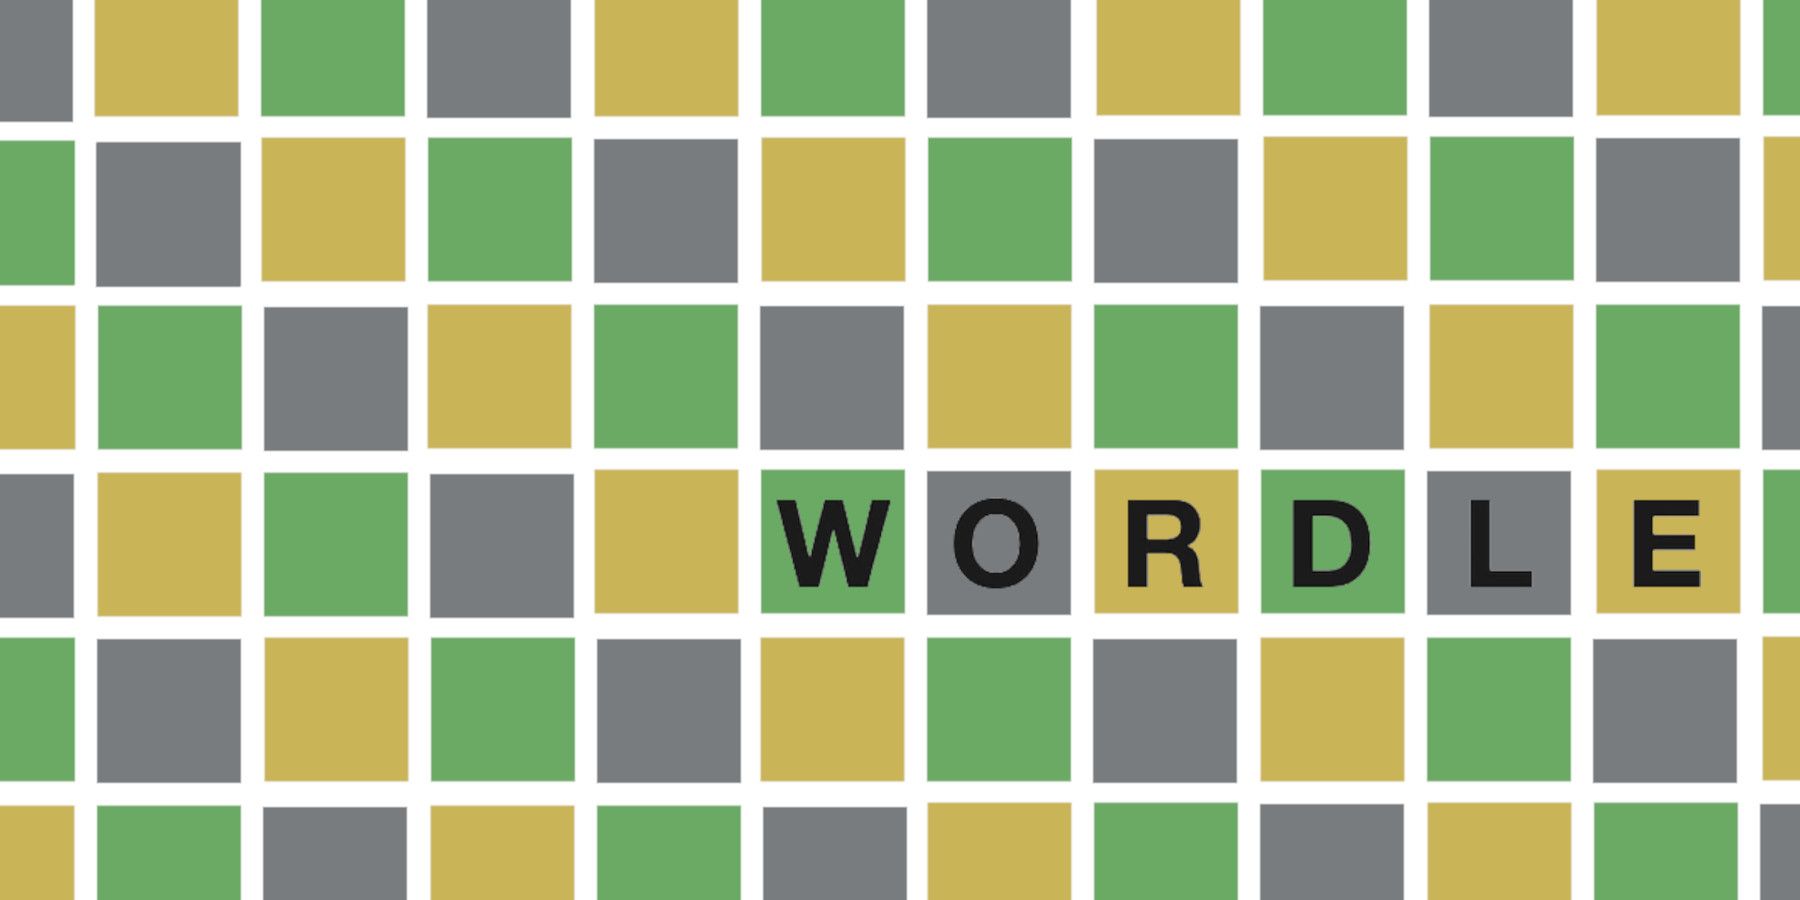 Some Wordle Players Think the Game is Getting 'Pretentious' After New